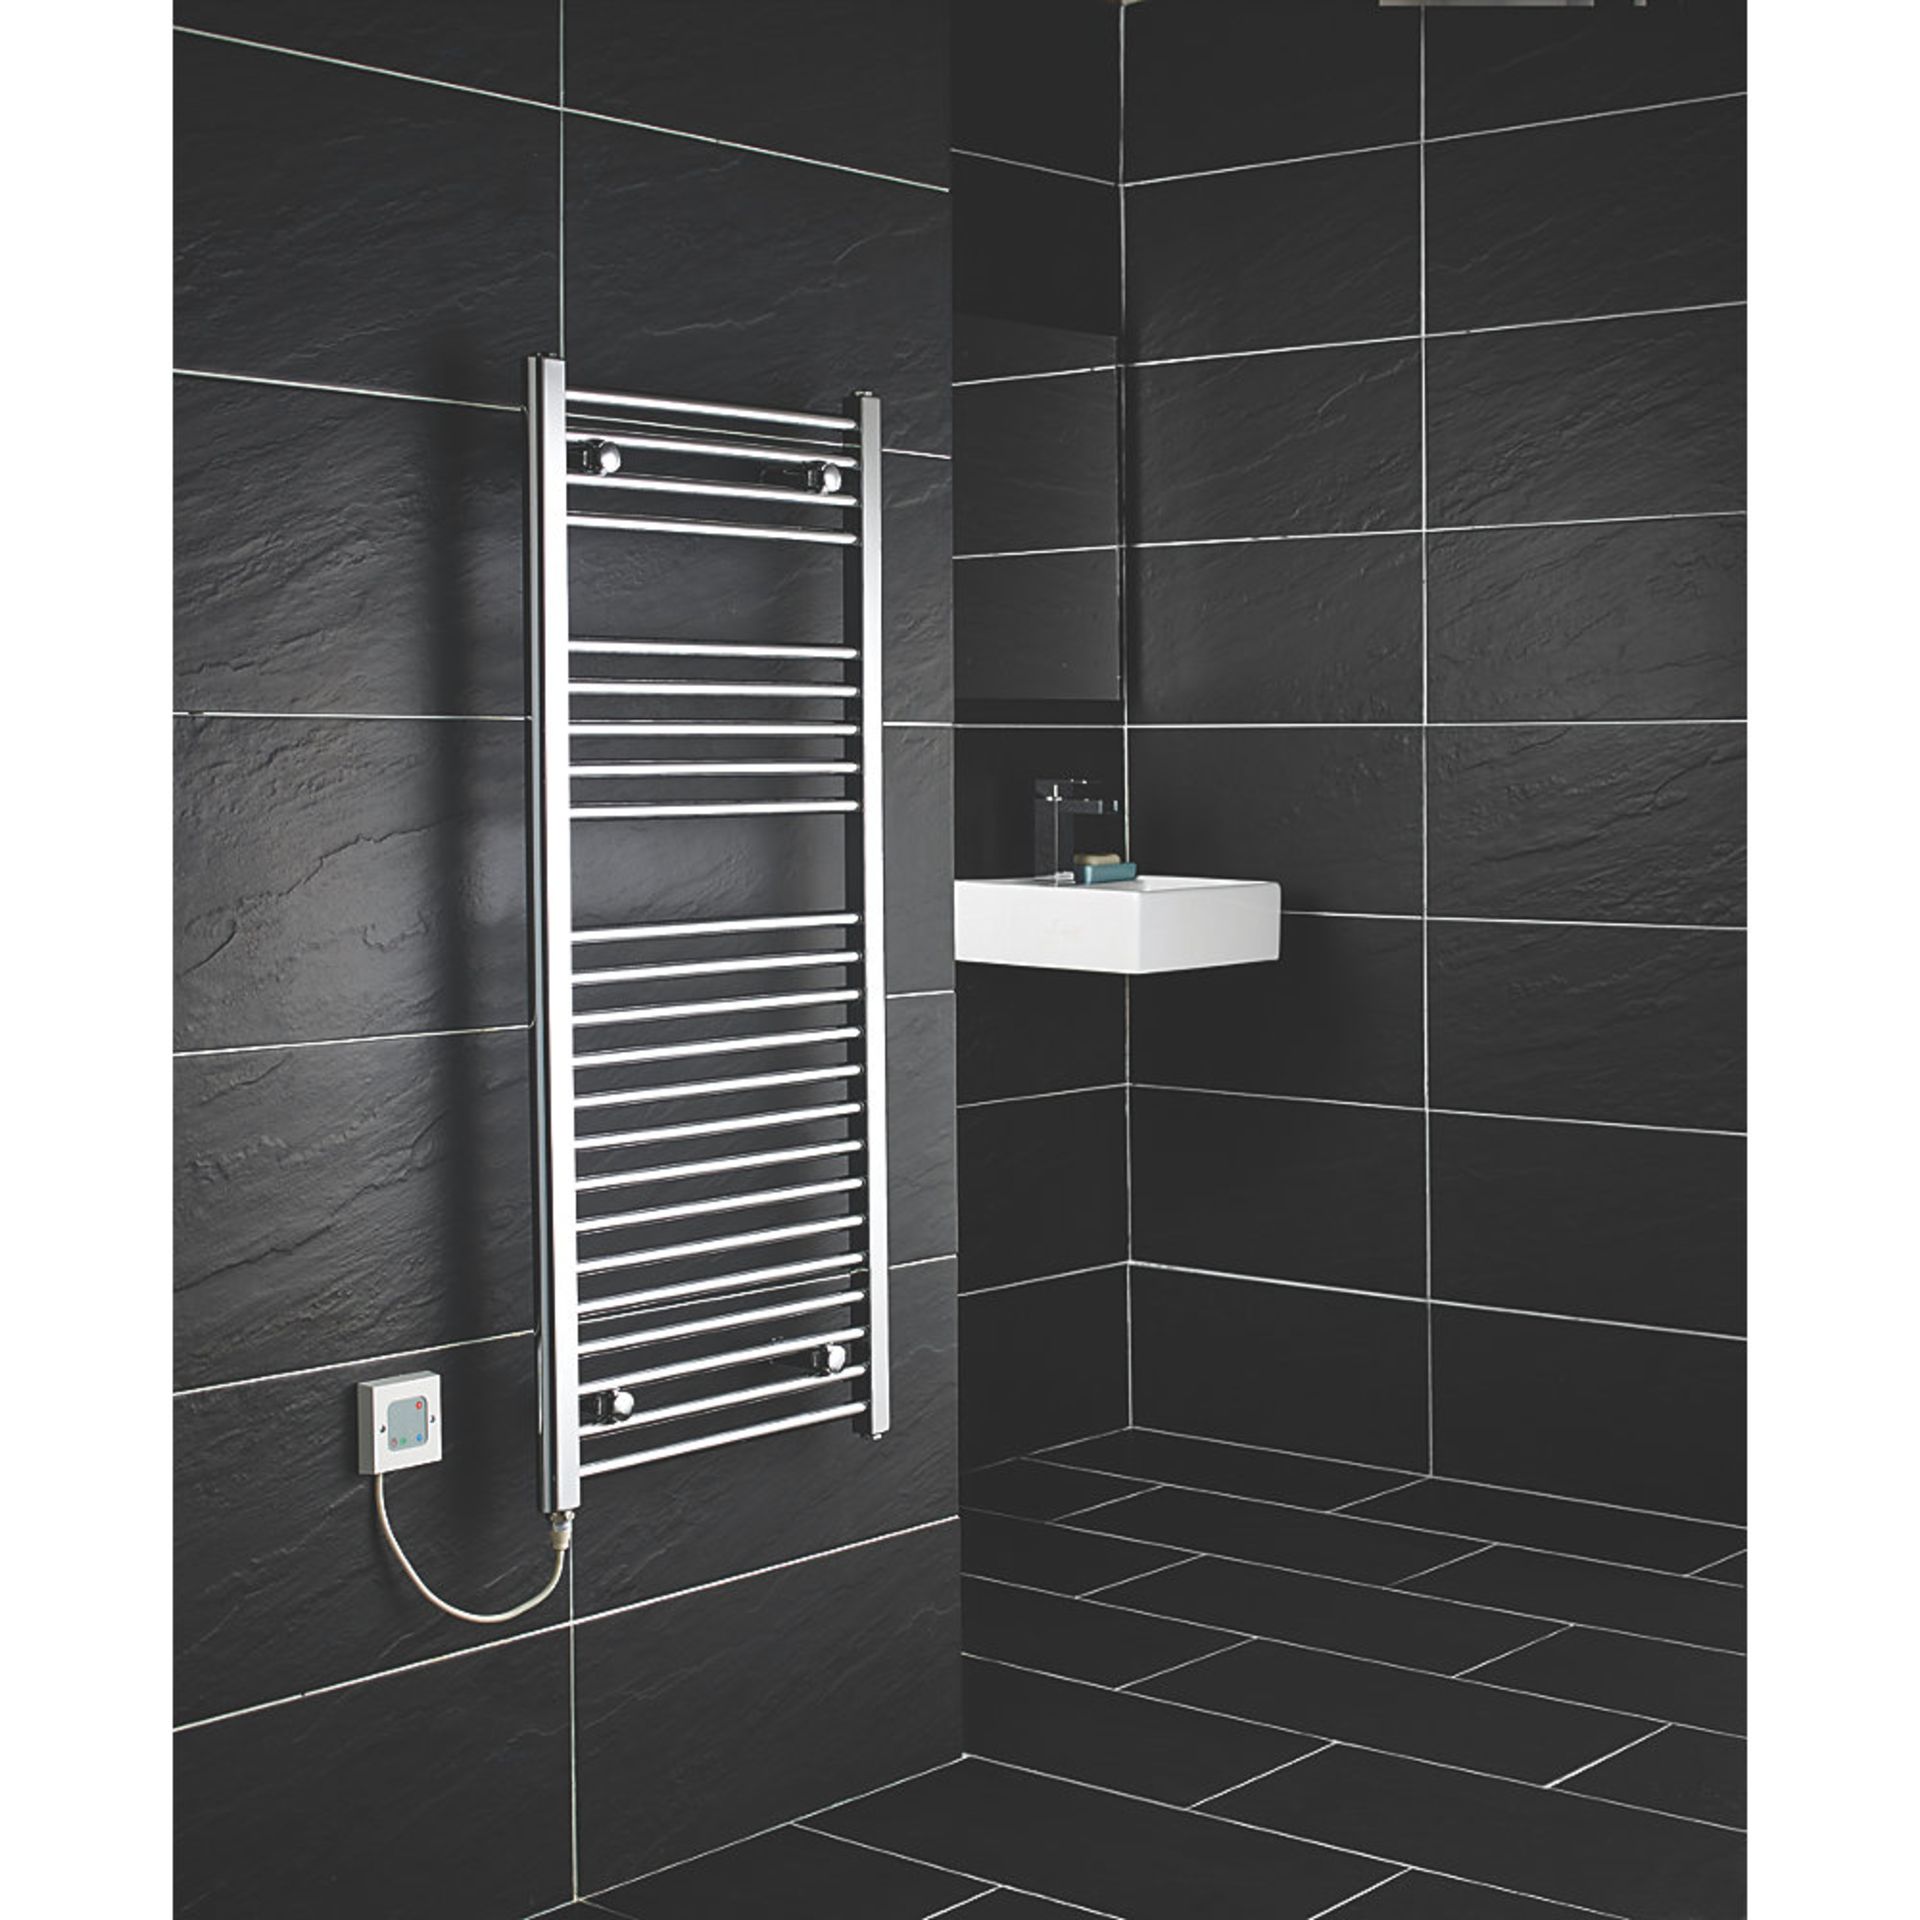 (H6) 1100x500mm FLOMASTA FLAT ELECTRIC TOWEL RADIATOR CHROME. Electrical installation only. Ele... - Image 2 of 5